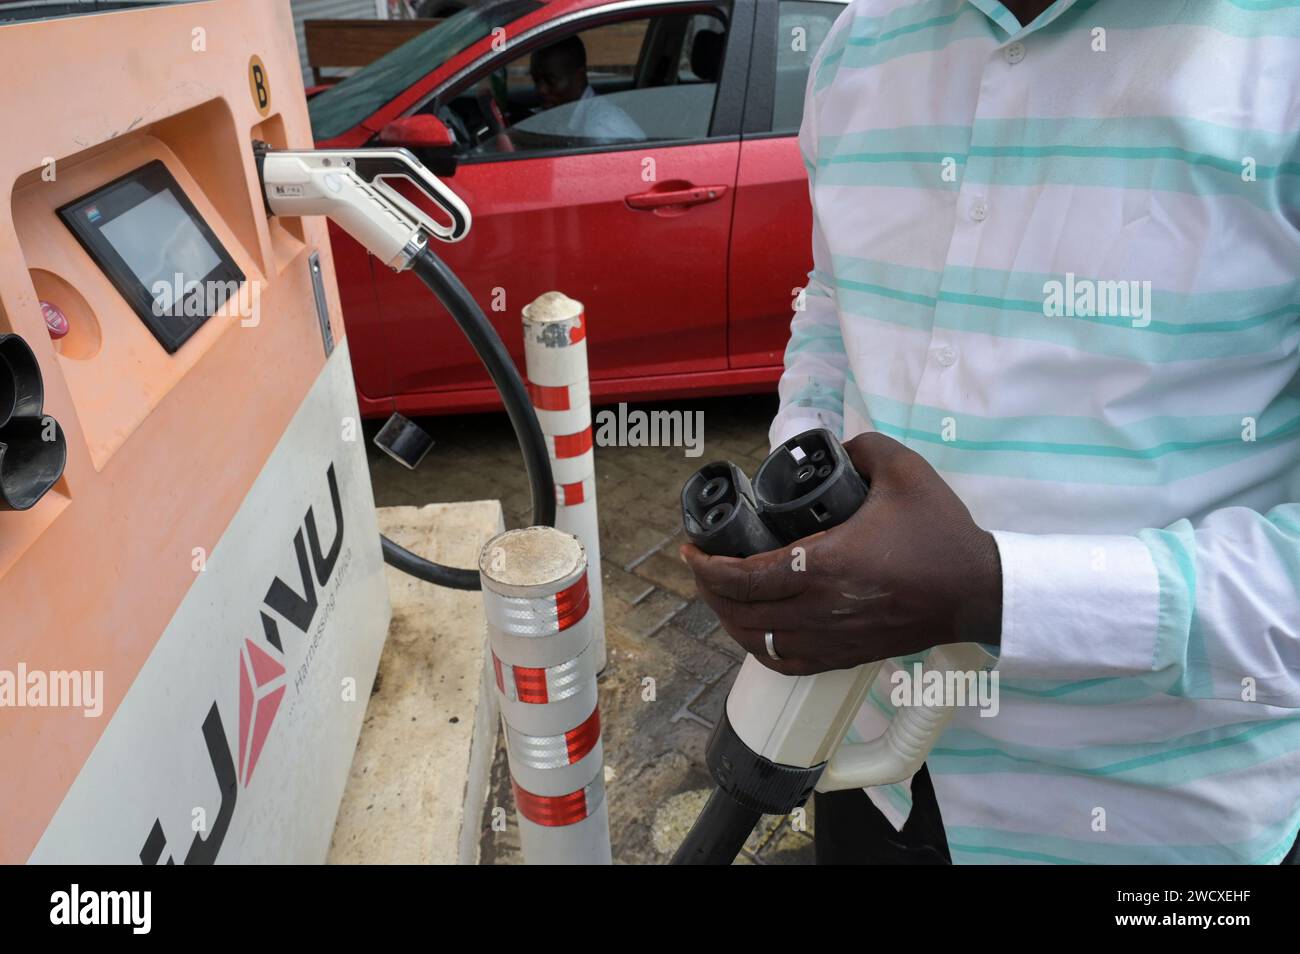 GHANA, Accra, electric mobility, IJANU service and quick charging station for electric cars, Tesla plug / GHANA, Accra, E-Mobilität, IJANU Service und Ladestation für E-Autos, Tesla Ladestecker Stock Photo